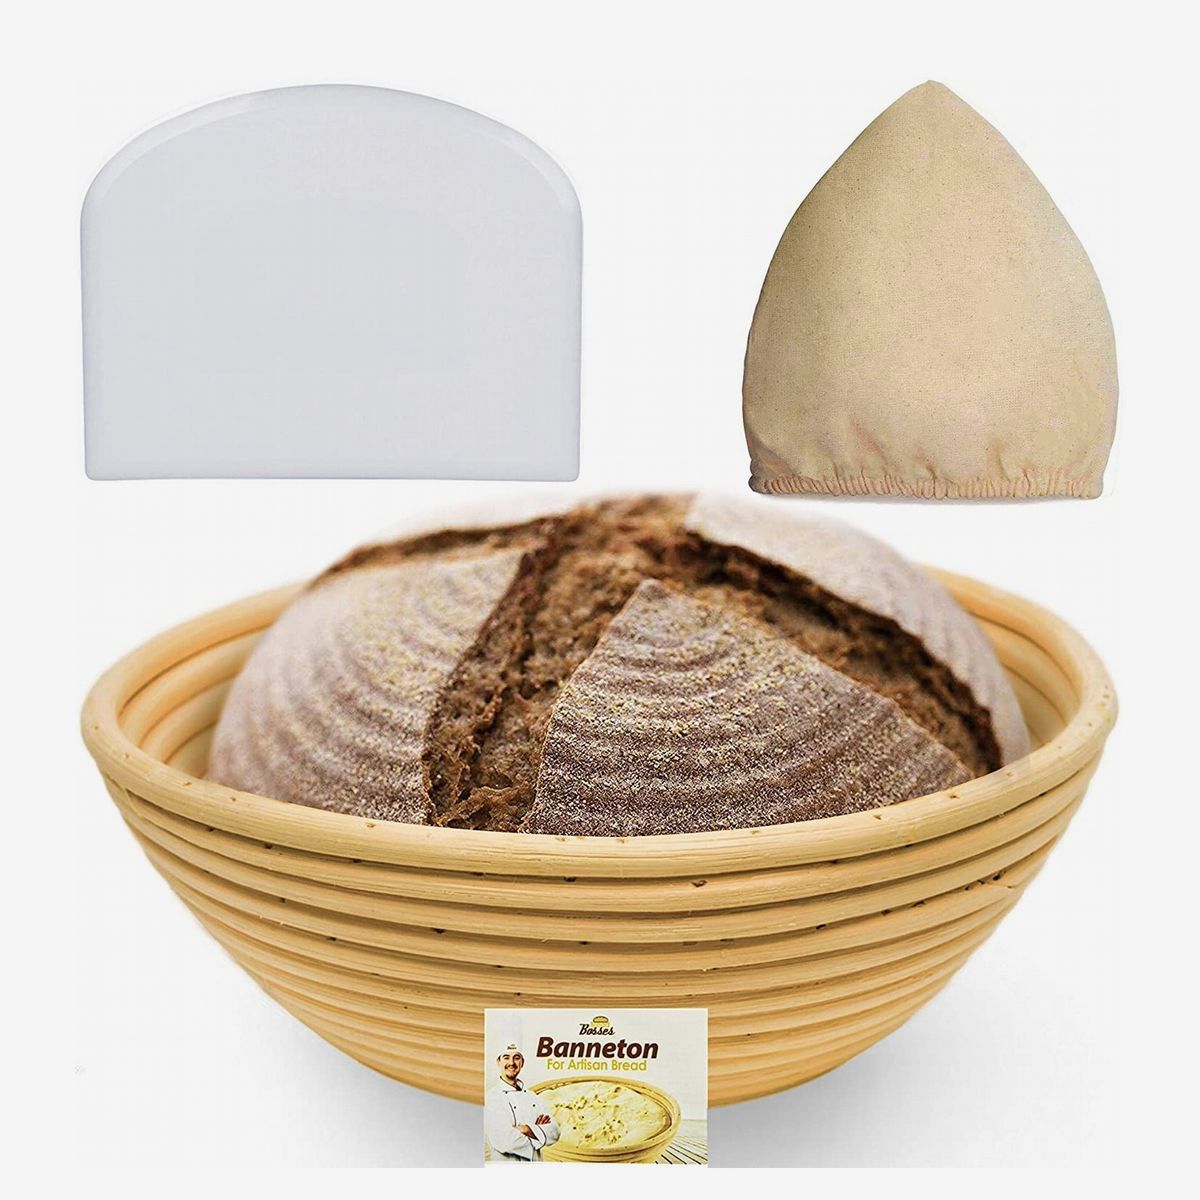 A proofing basket with a loaf of bread